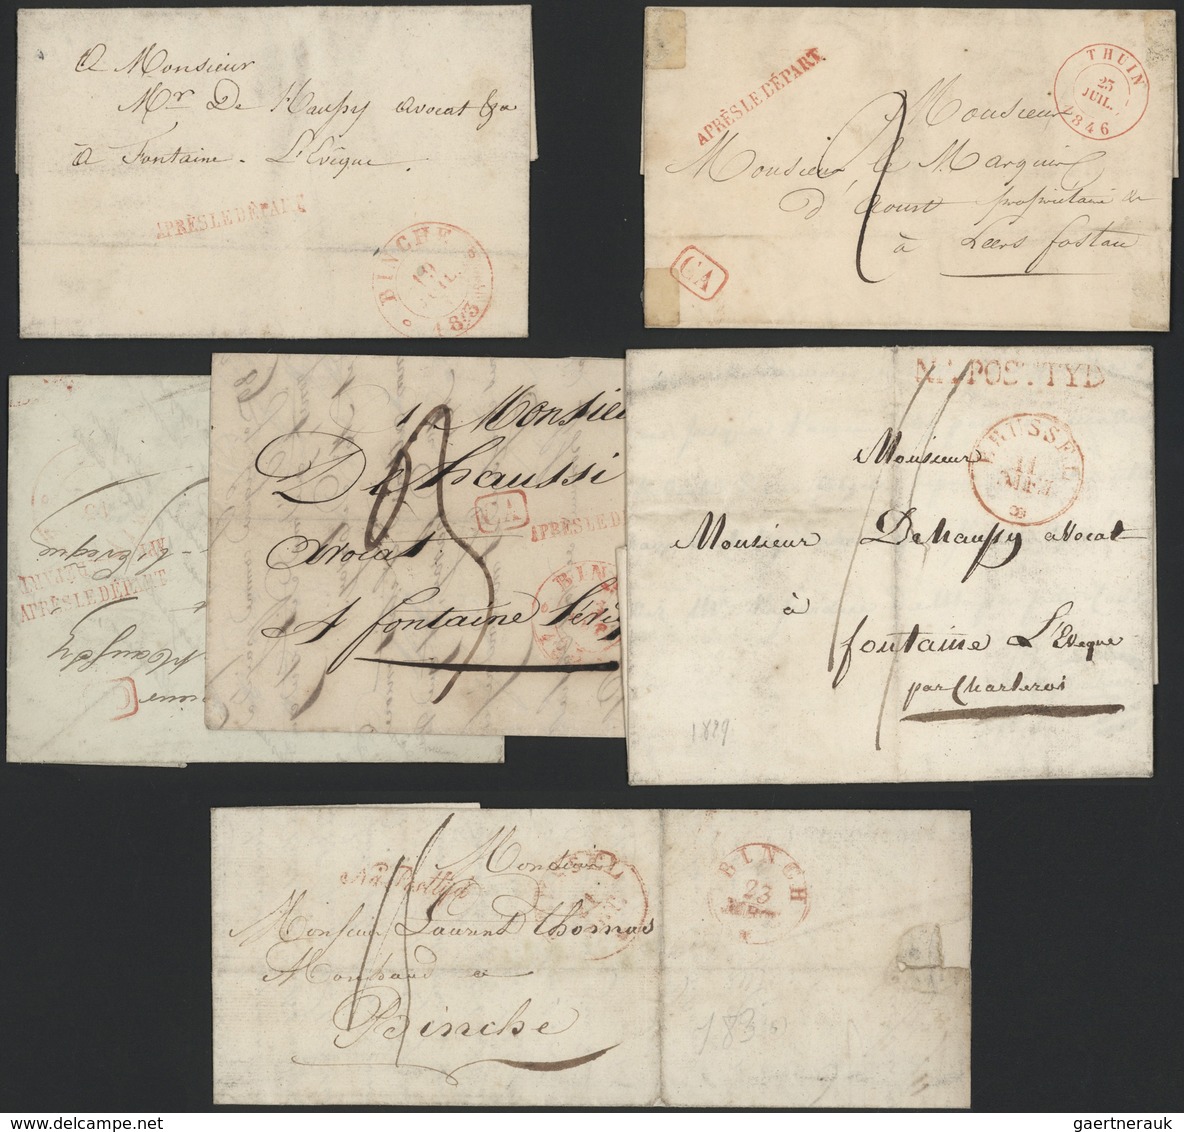 Belgien - Stempel: BINCHE, 1801/1850 ca., specialized and very detailed collection comprising the pr